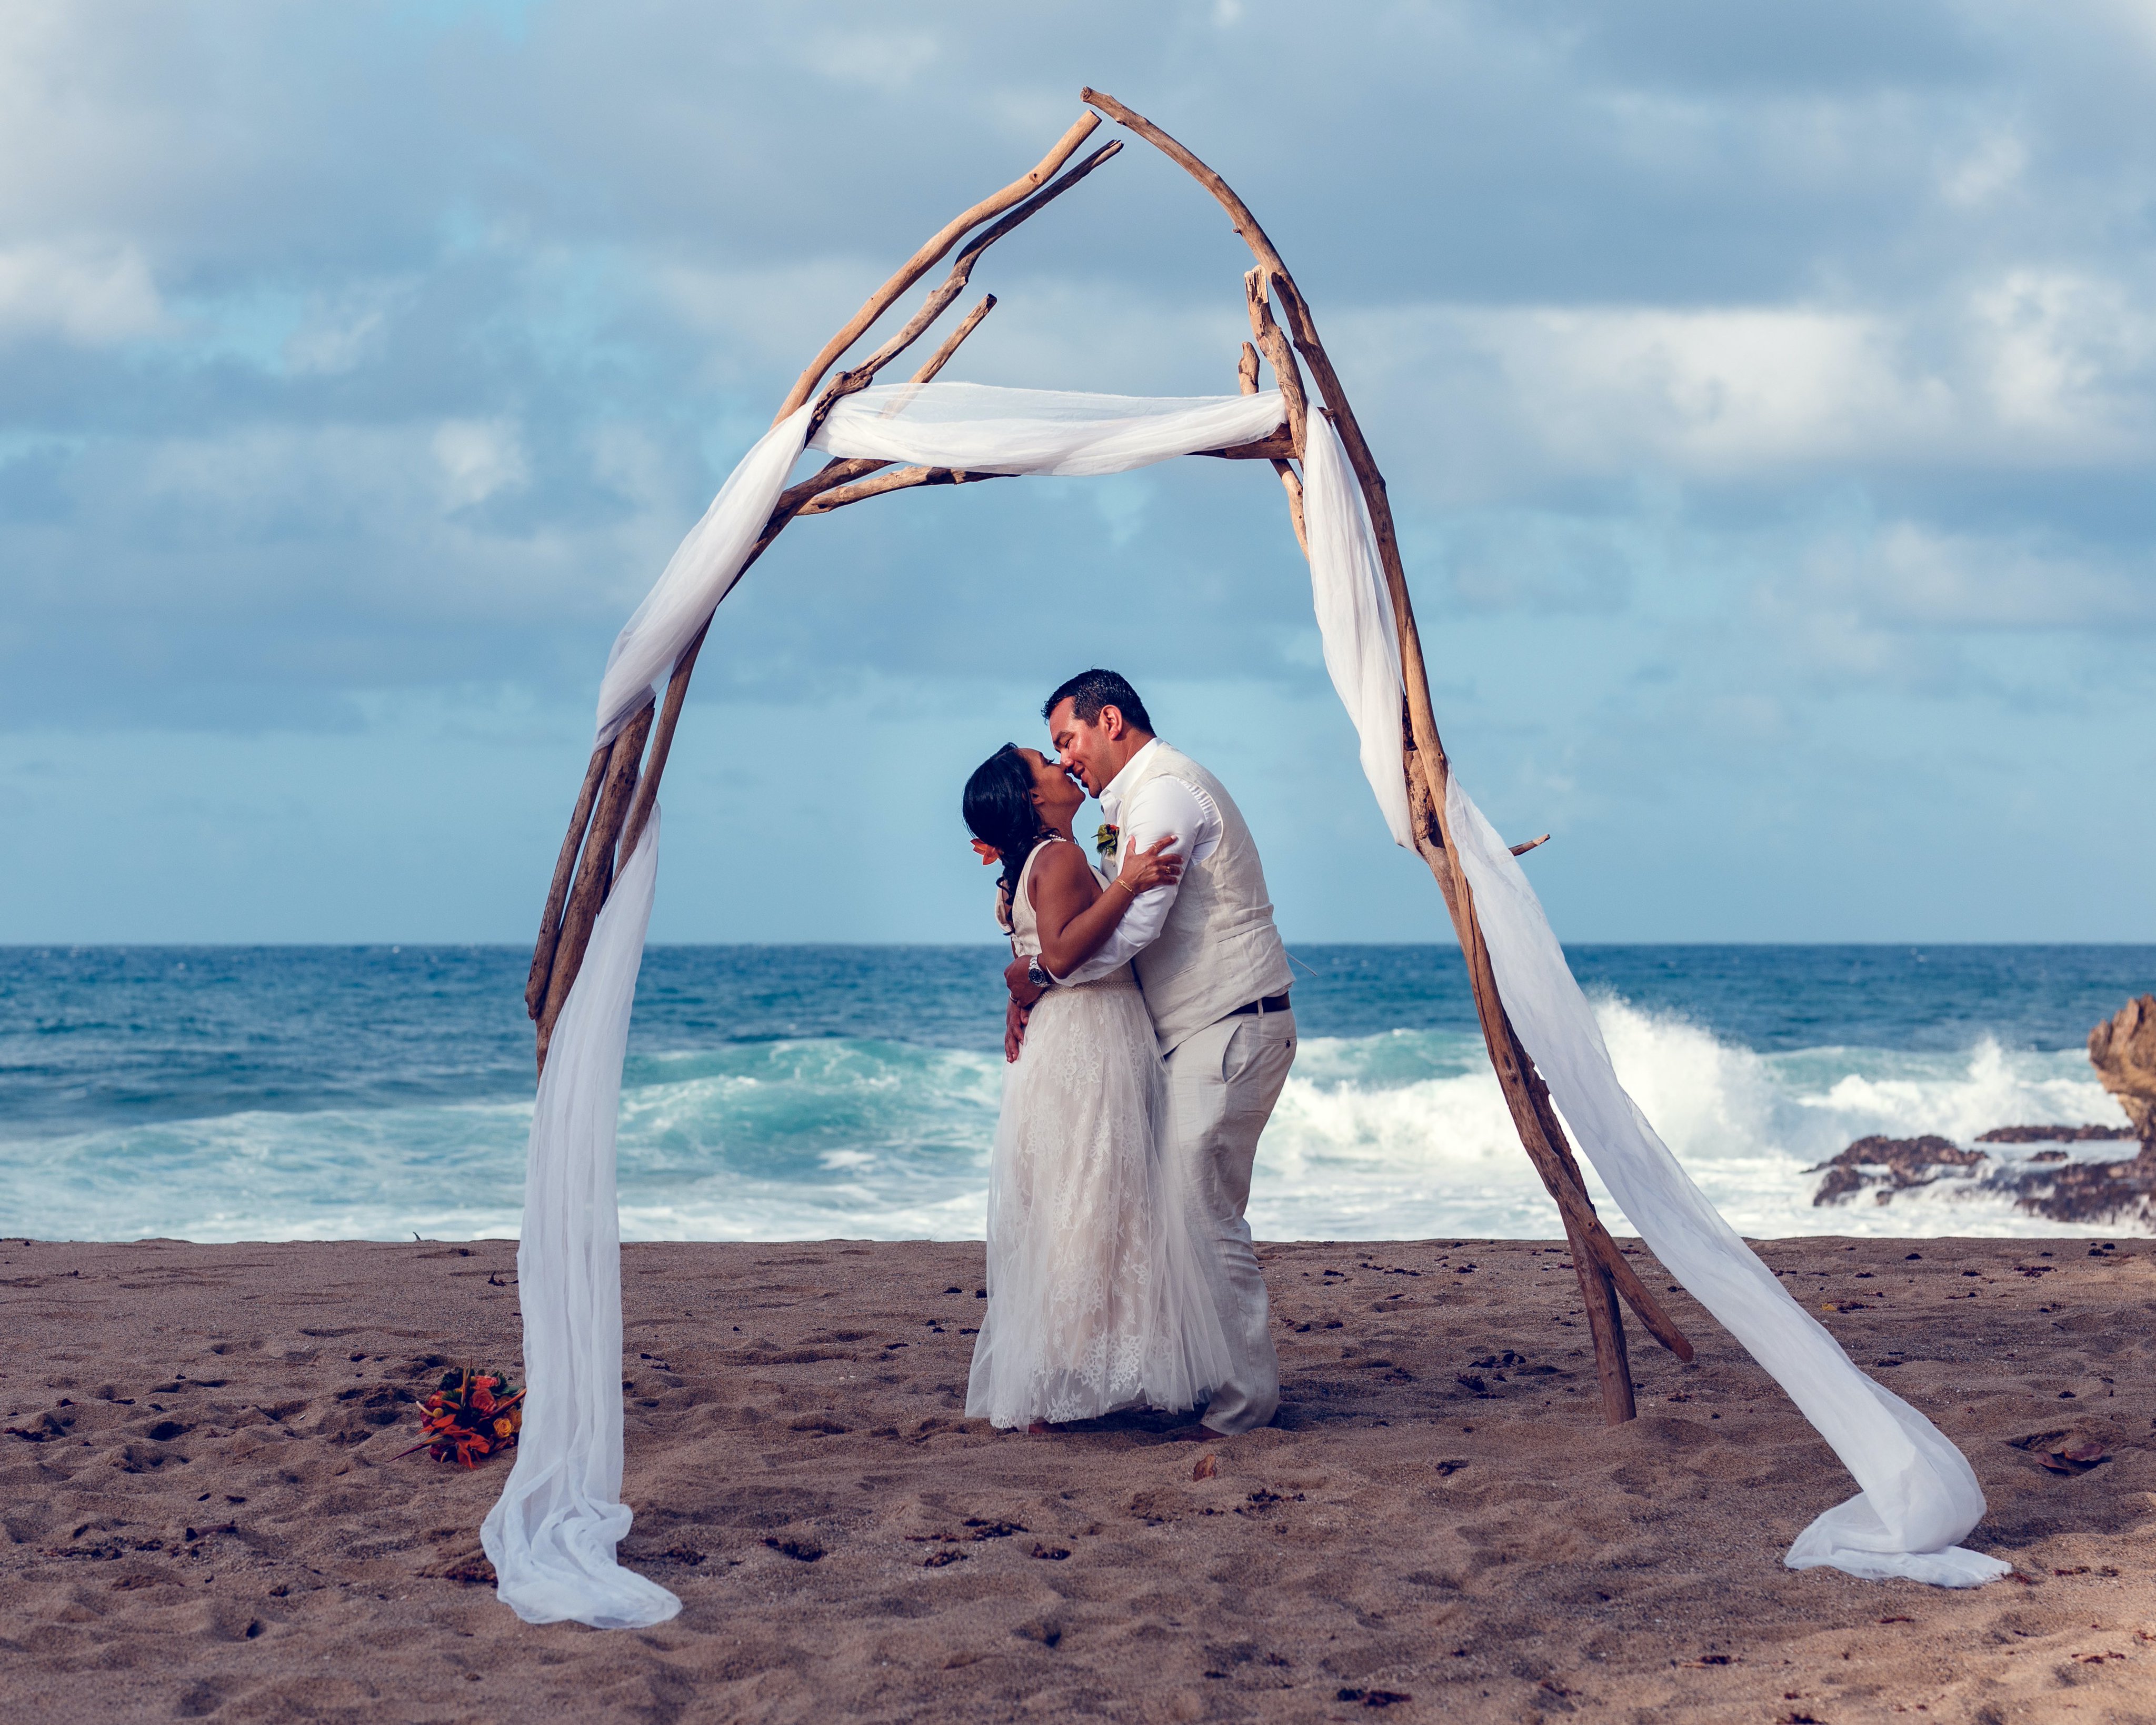 capítulo Hasta aquí recepción Puerto Rico Weddings on Twitter: "Stephanie &amp; Marlon said yes barefoot  in the sand at Puerto Hermina with a beautiful decor featuring a driftwood  arbor, simply stunning!✨ Photo: @AJRphotographyllc #wedding #romance # puertorico #